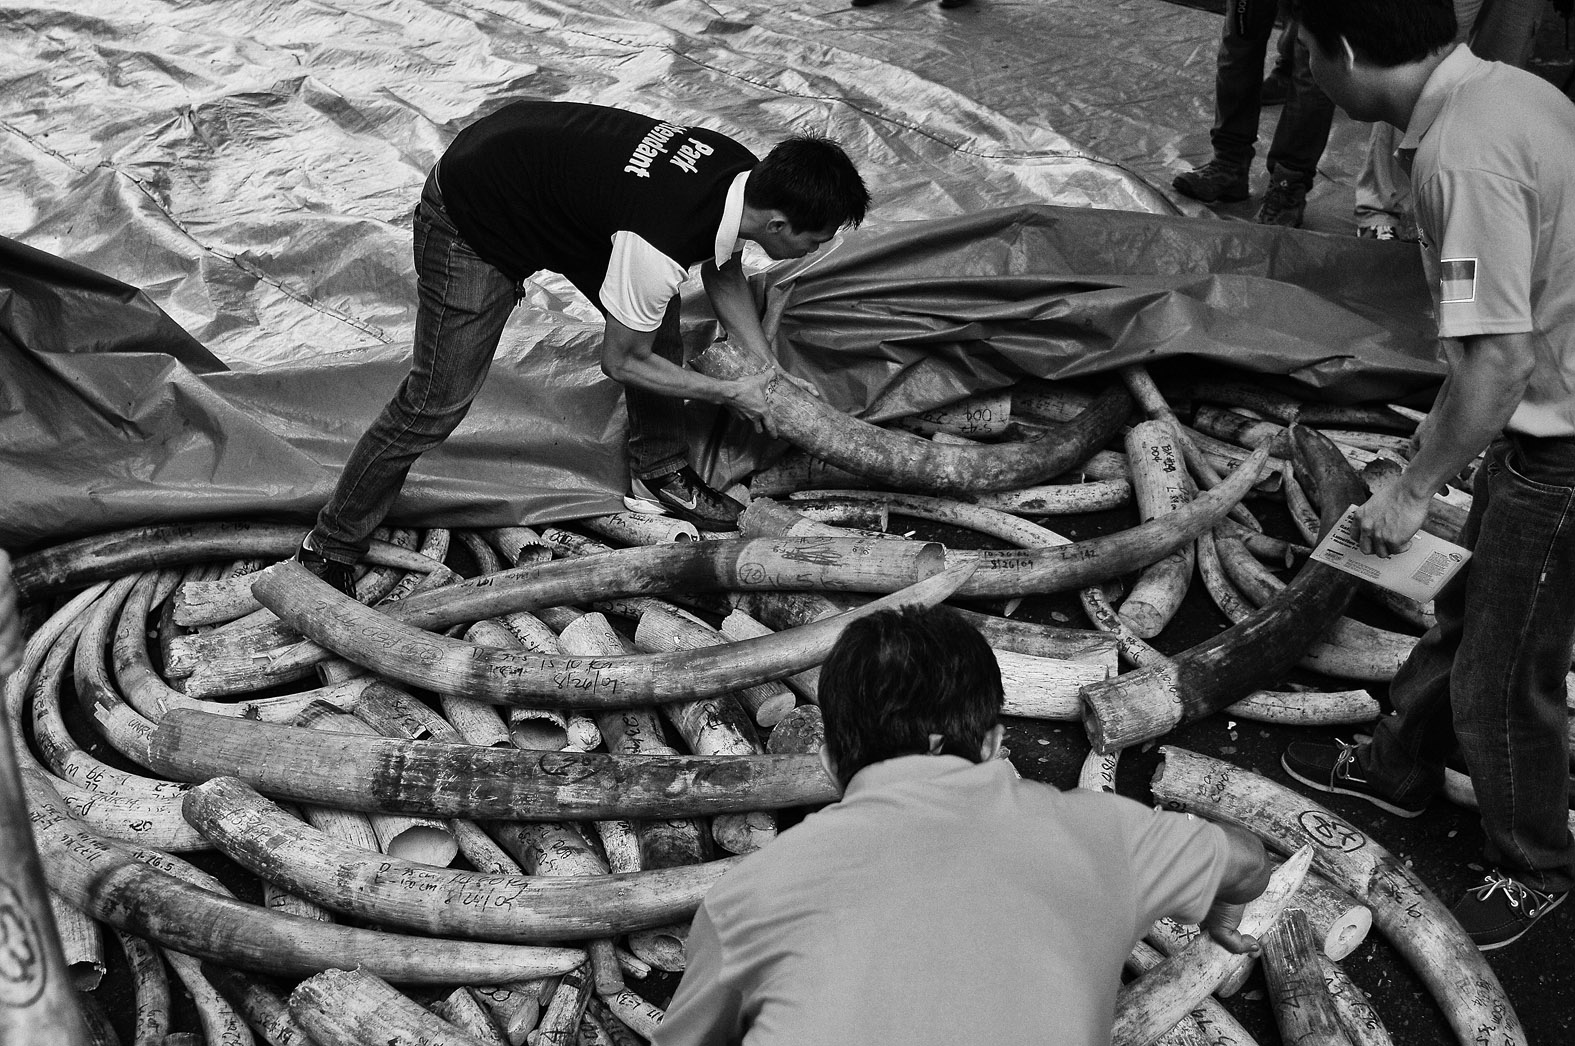 Illegal ivory in the Philippines